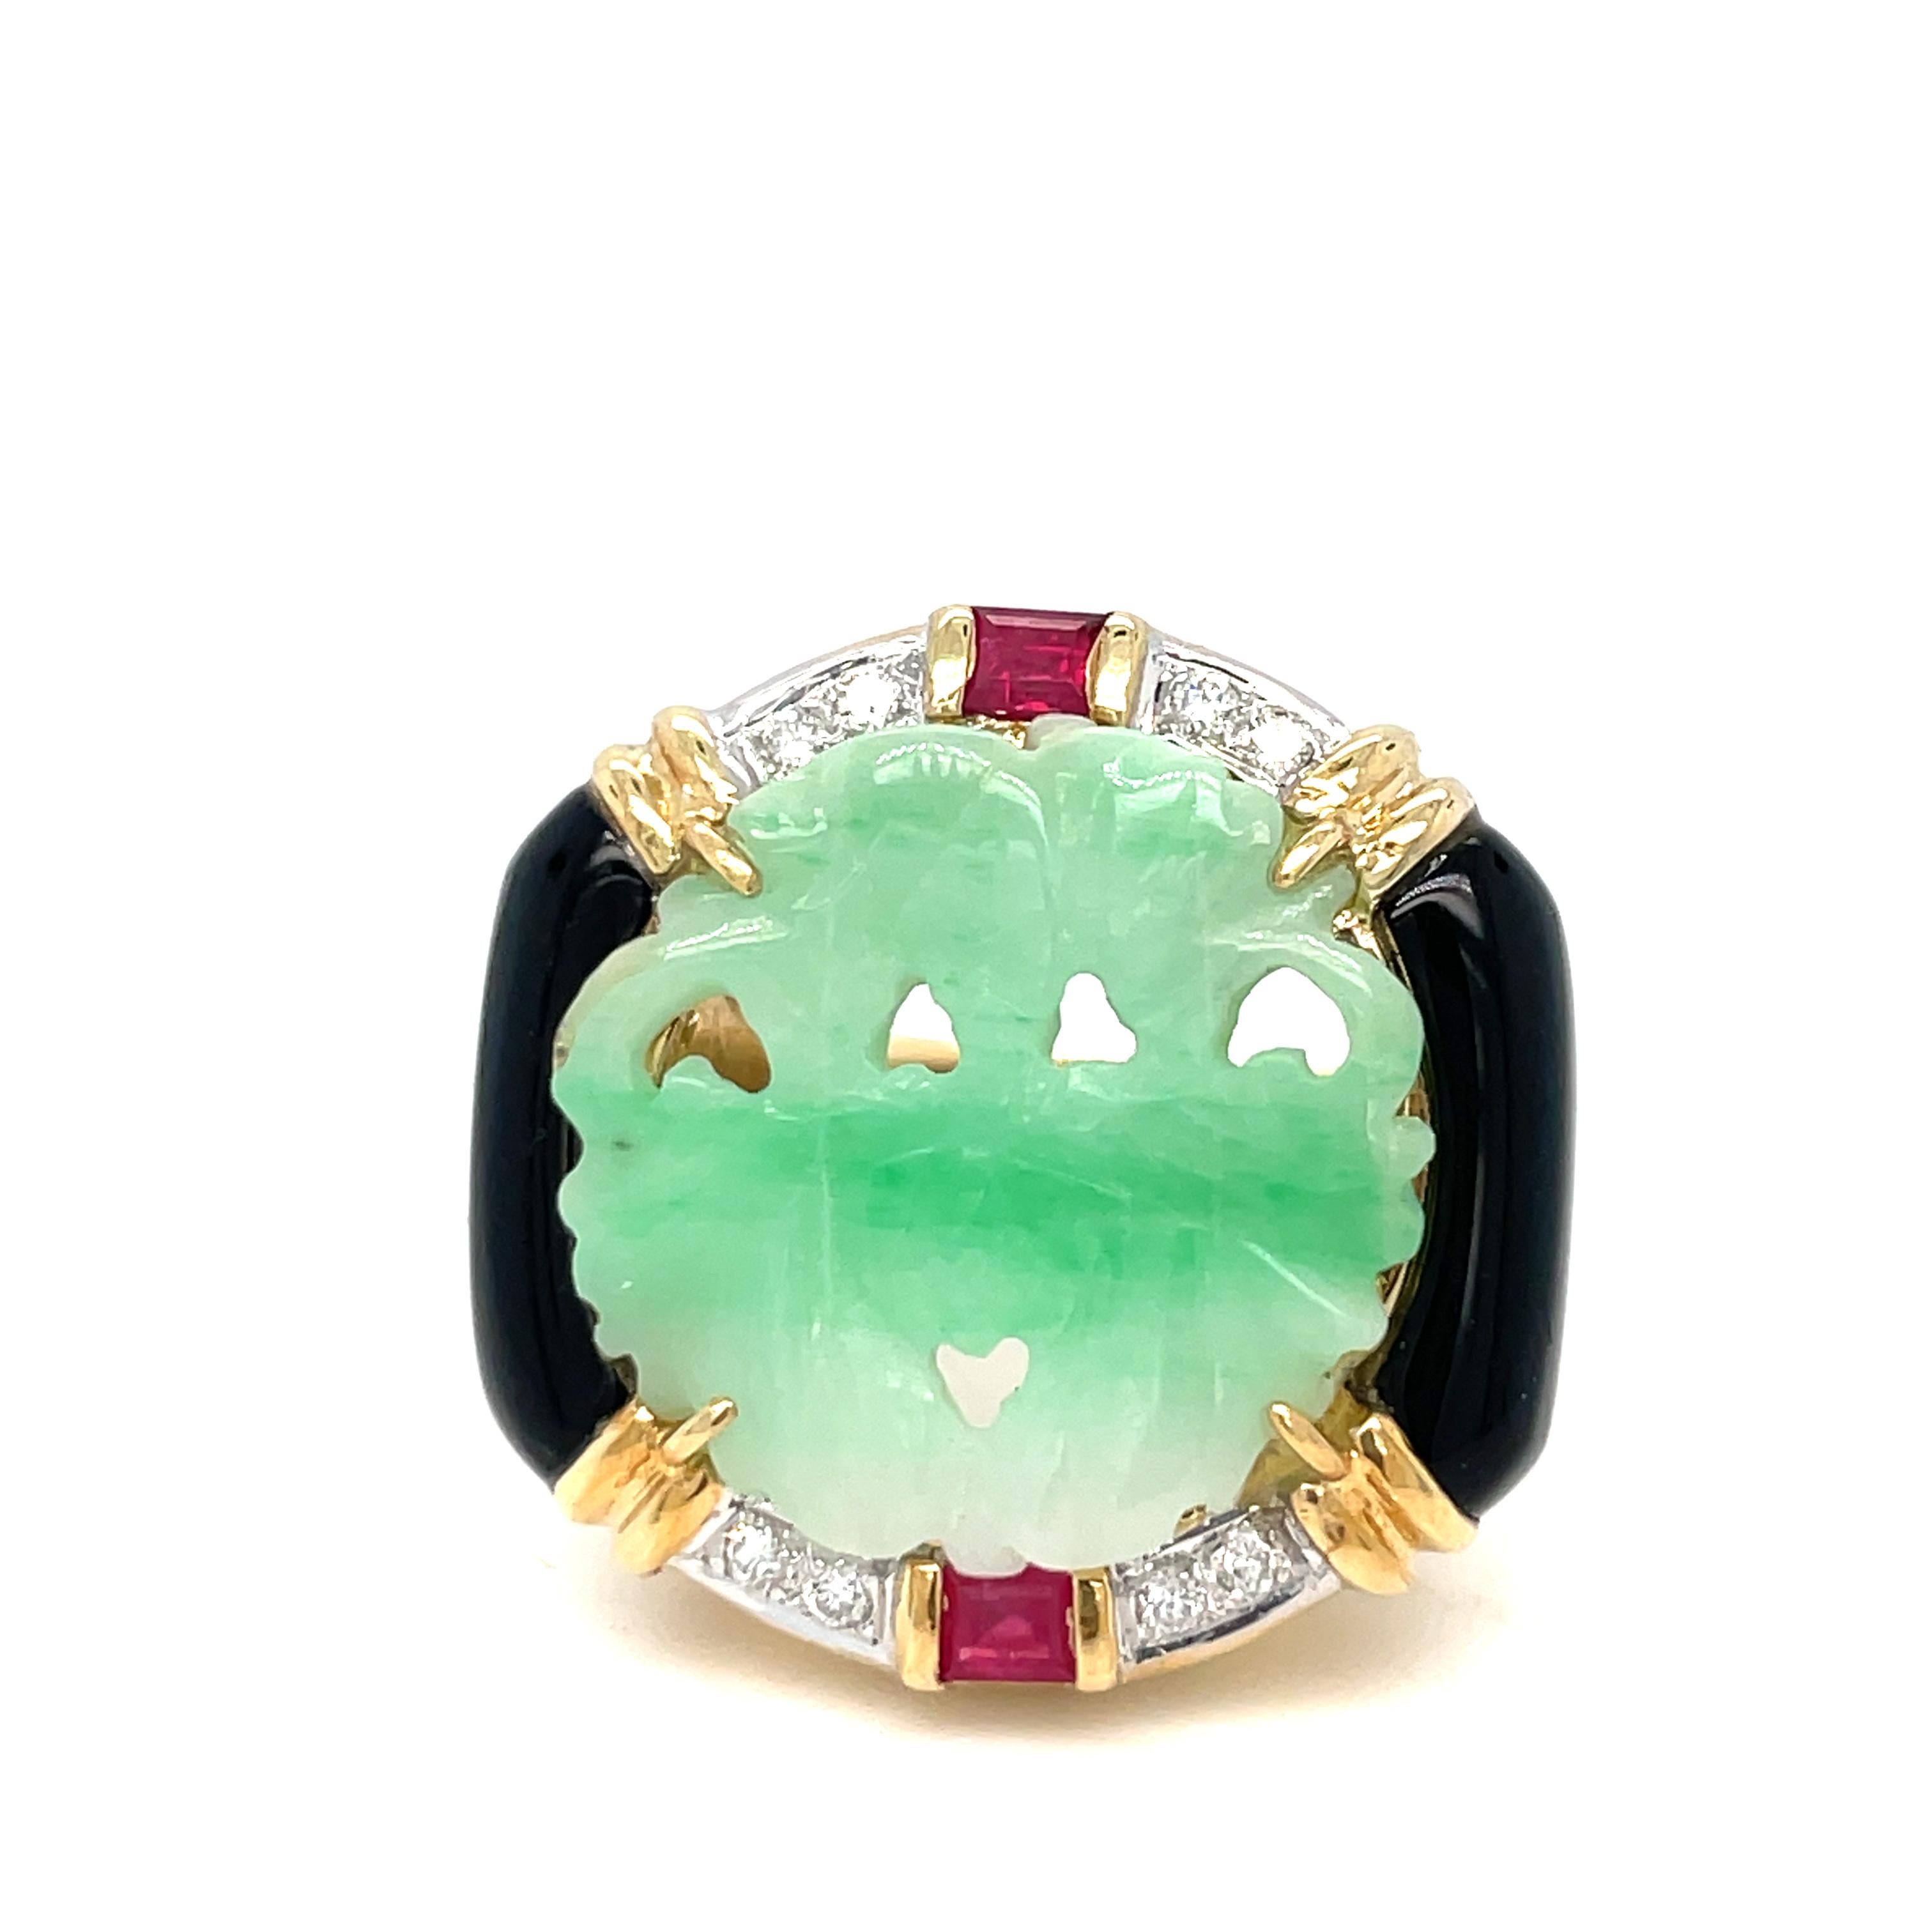 This gorgeous ring features a round-shaped plaque of hand-carved jade with an ornate oriental design, onyx, diamonds accented with 2 rubies, one on each side of the ring crafted in 18k yellow gold. 

The carved jade is prong-set, measuring 19.6 mm x